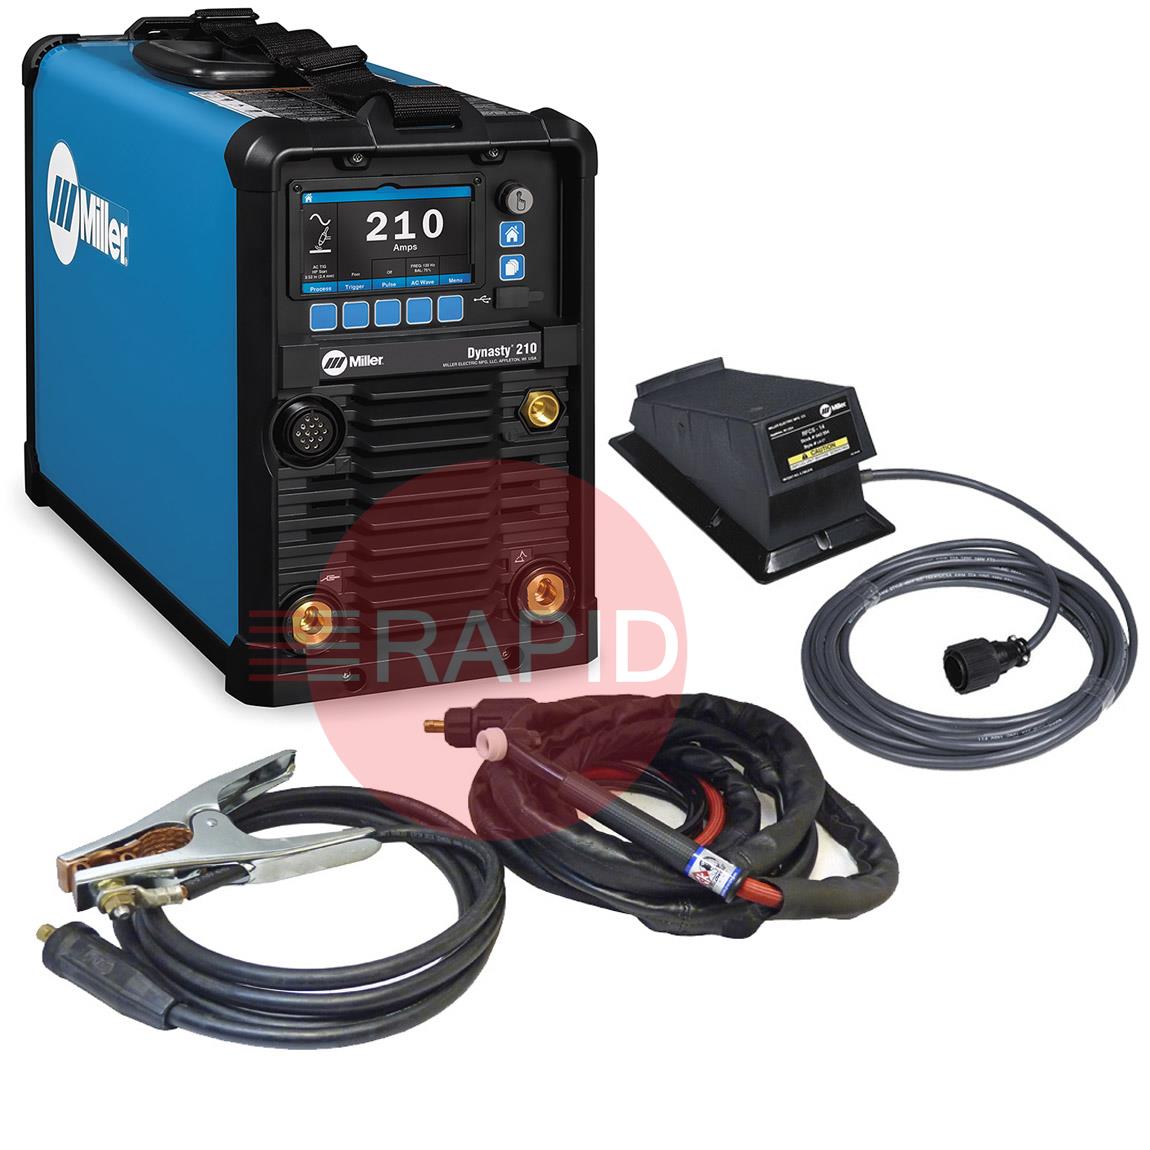 907816003APFP  Miller Dynasty 210 AC/DC Tig Welder Package with TL 210 and Foot Pedal, 120 - 480v 3ph